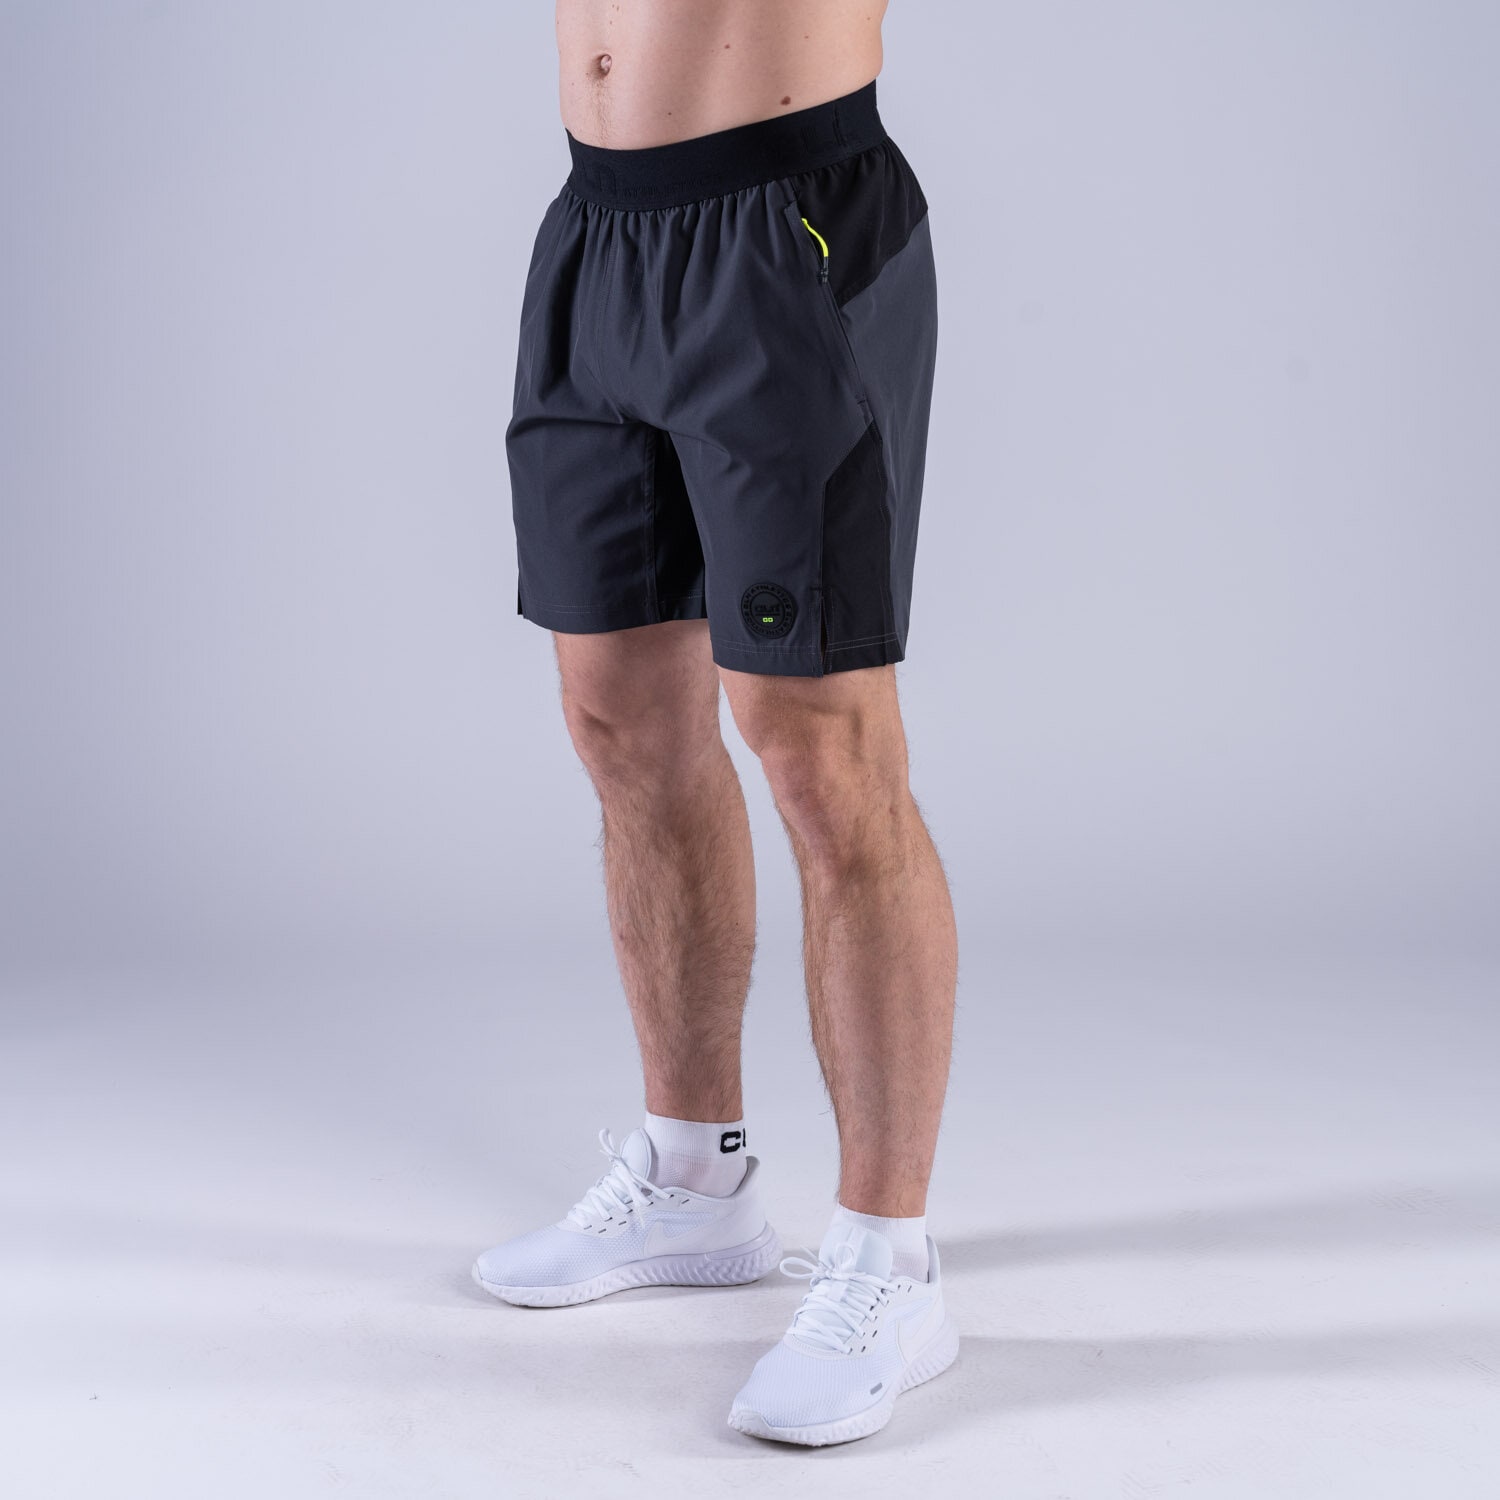 CLN Energy stretch shorts Charcoal